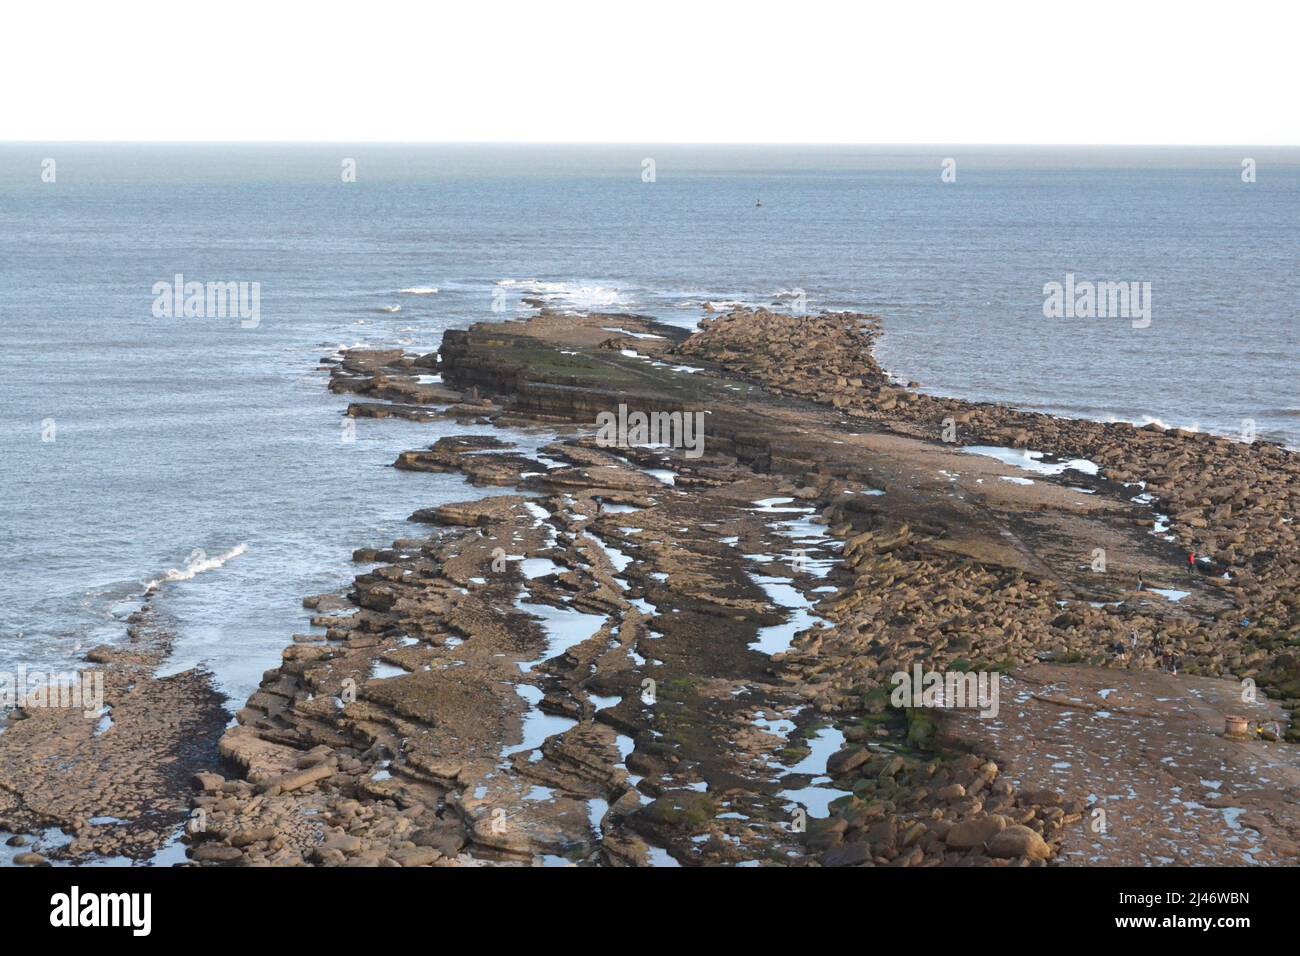 Filey Brigg On A Calm Peaceful Day - Blue Sky - Tourist Destination + Holiday Resort In North Yorkshire - UK Stock Photo